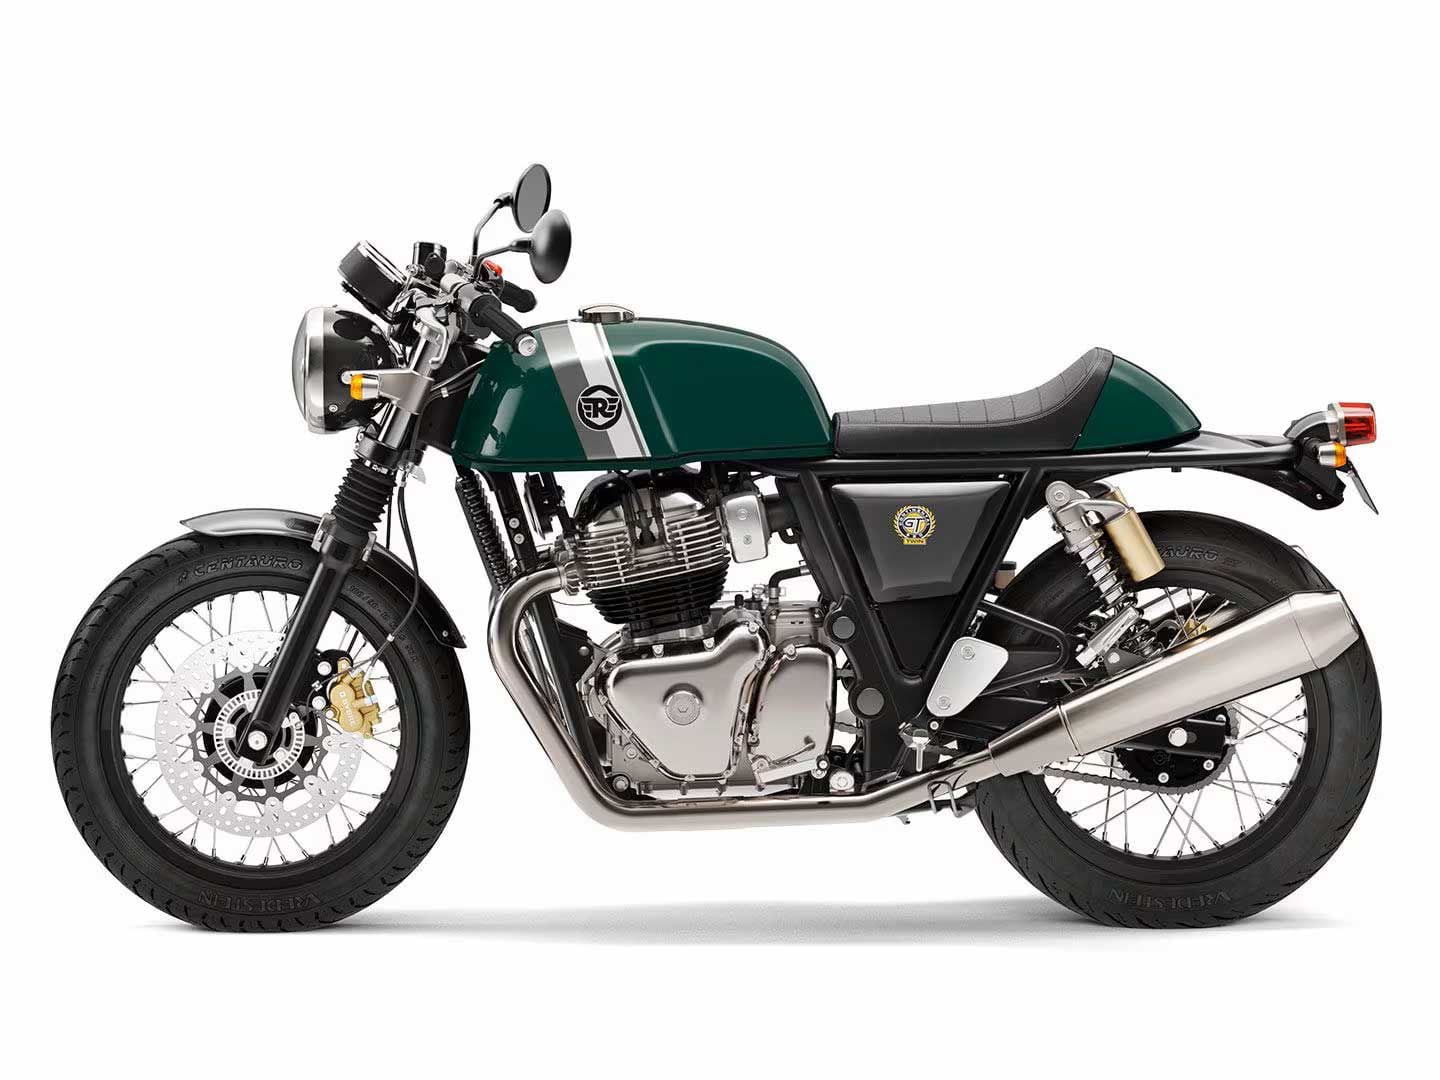 2024 Royal Enfield Continental GT 650 and INT 650 models also get minor updates this year, and include four brand-new blacked-out variants. This GT 650 with spoked wheels and chrome finishes has a starting MSRP of $6,349.